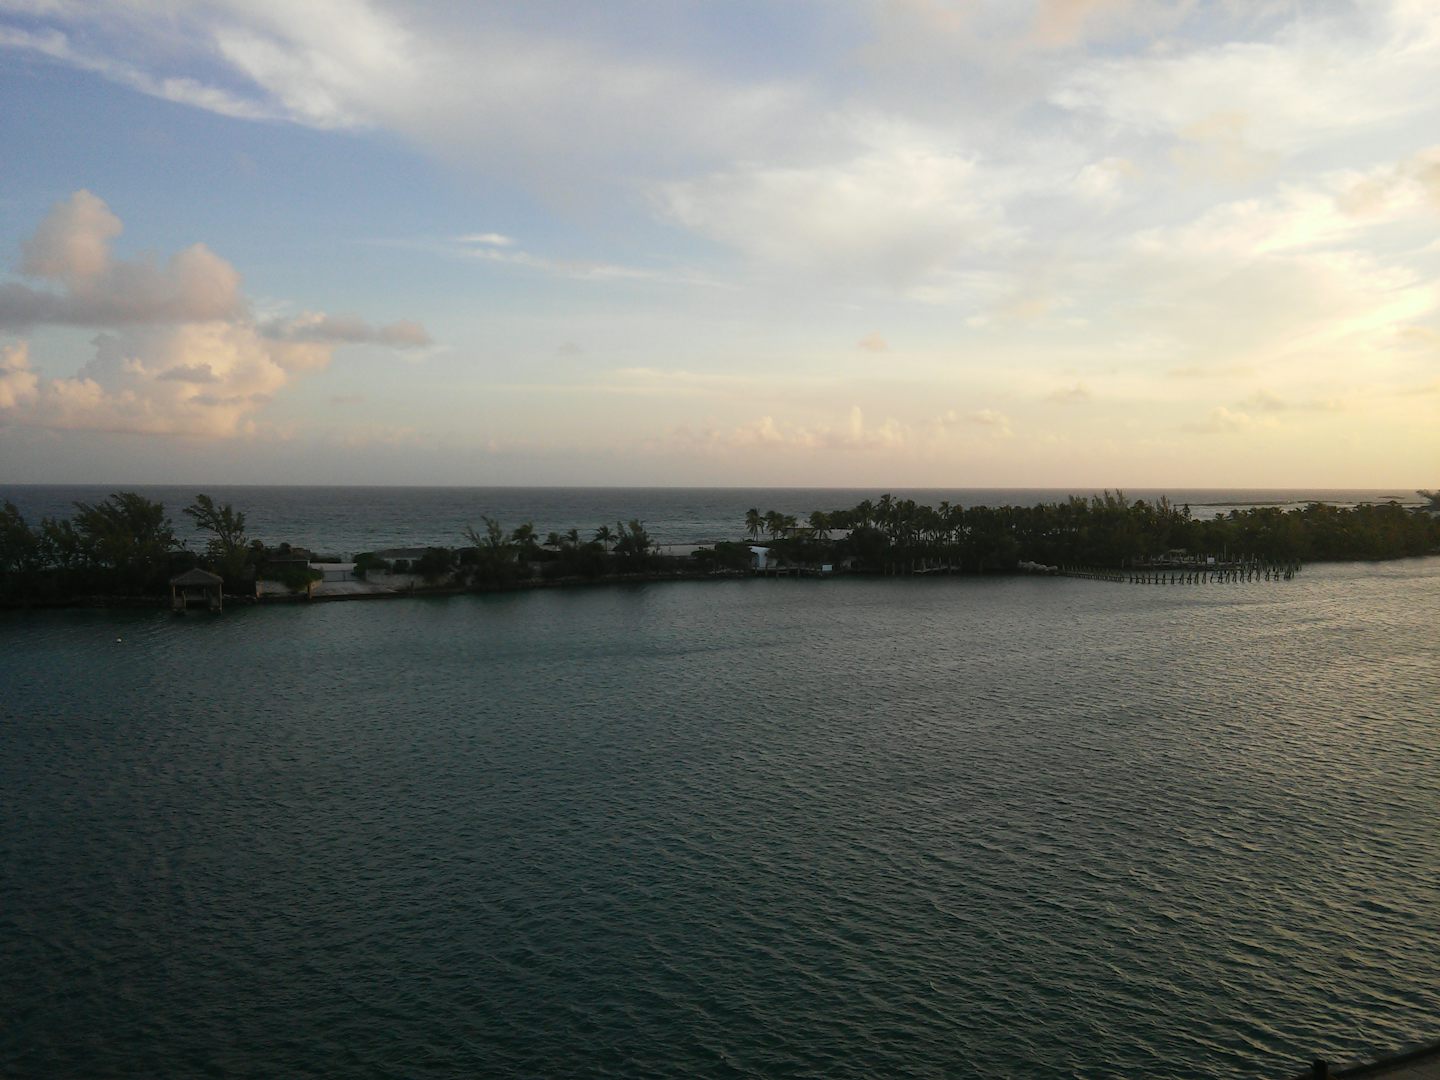 Nassau at port from the balcony.